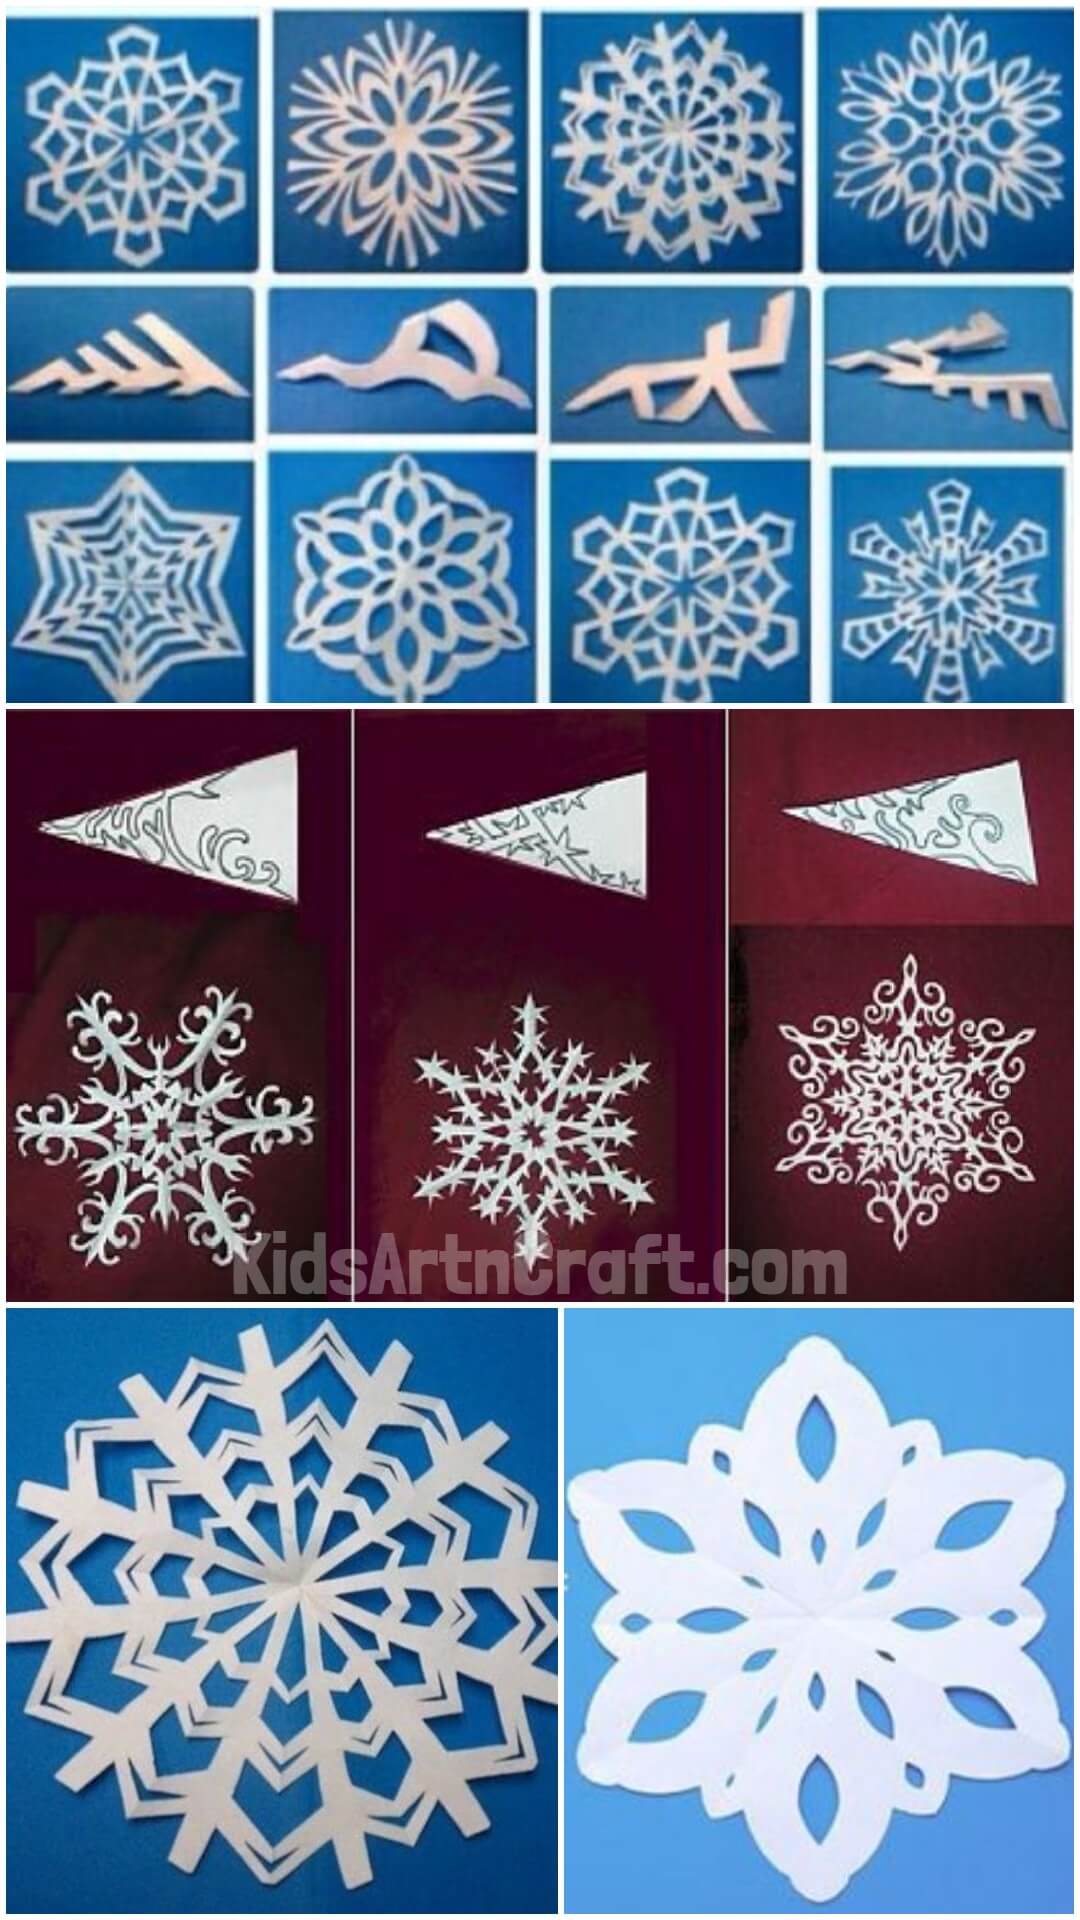 Learn to Make Easy Paper Snowflakes